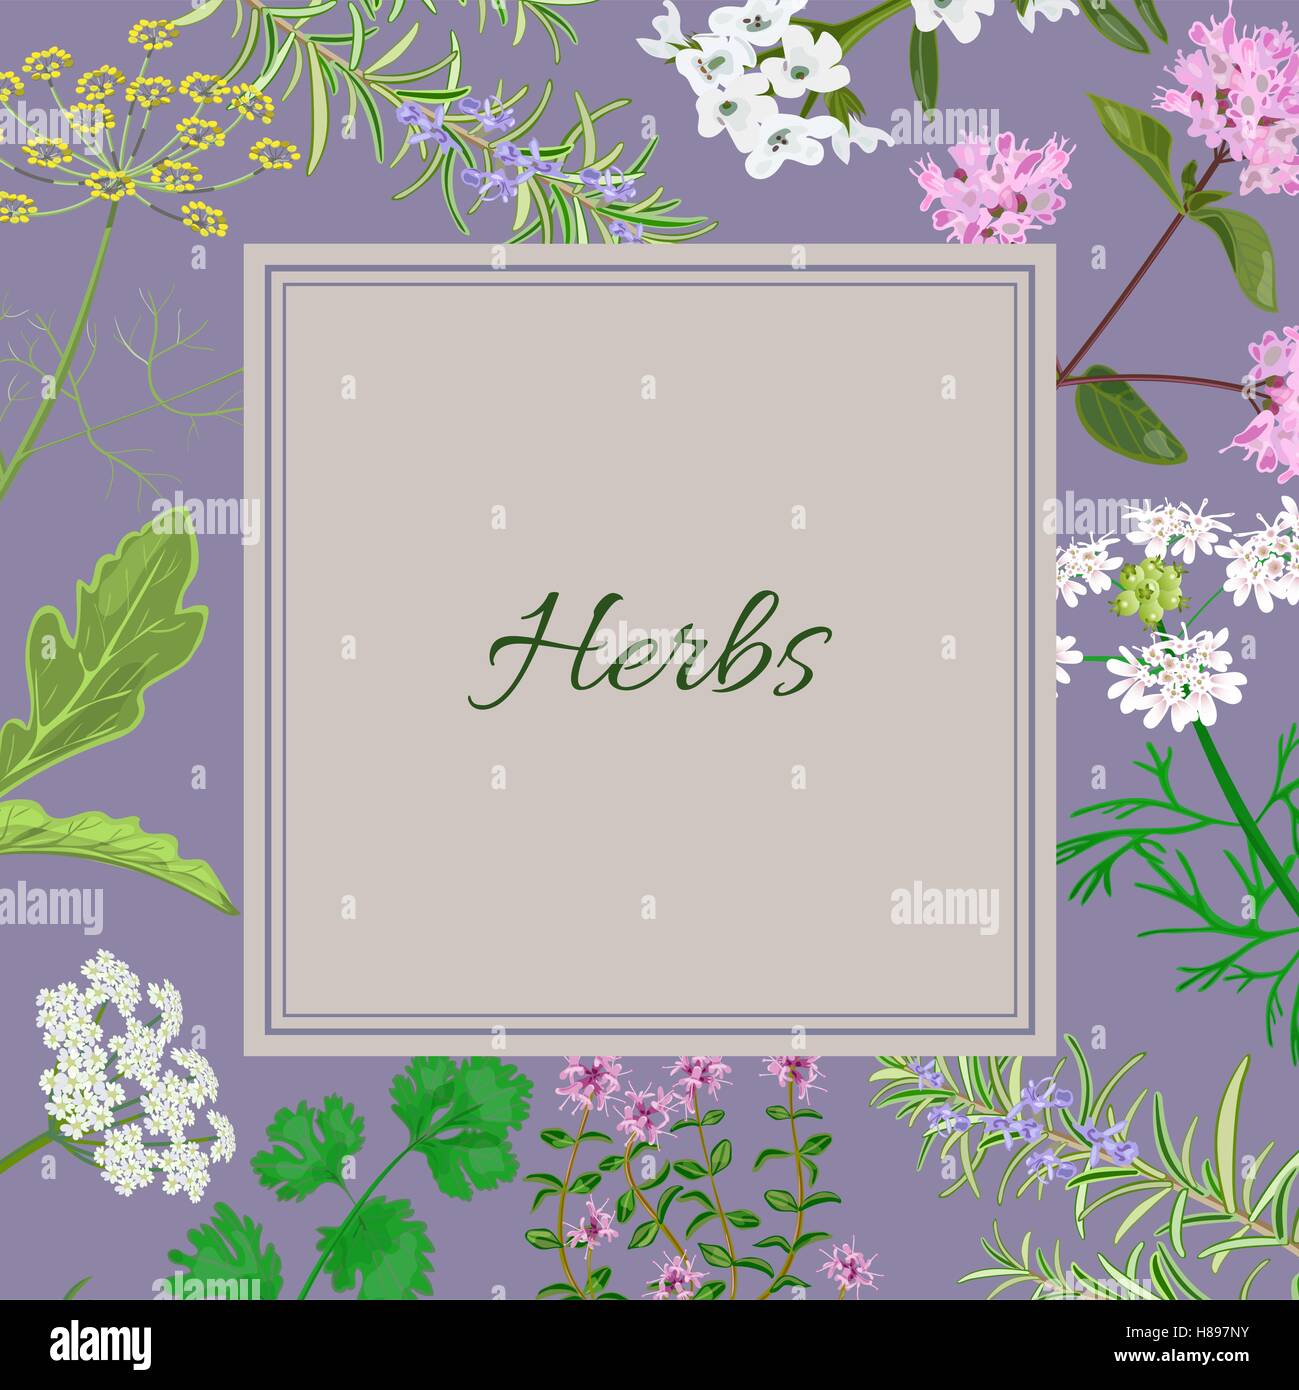 Vector card with herbs and plants. Vintage square with herbal flowers illustration. Stock Vector